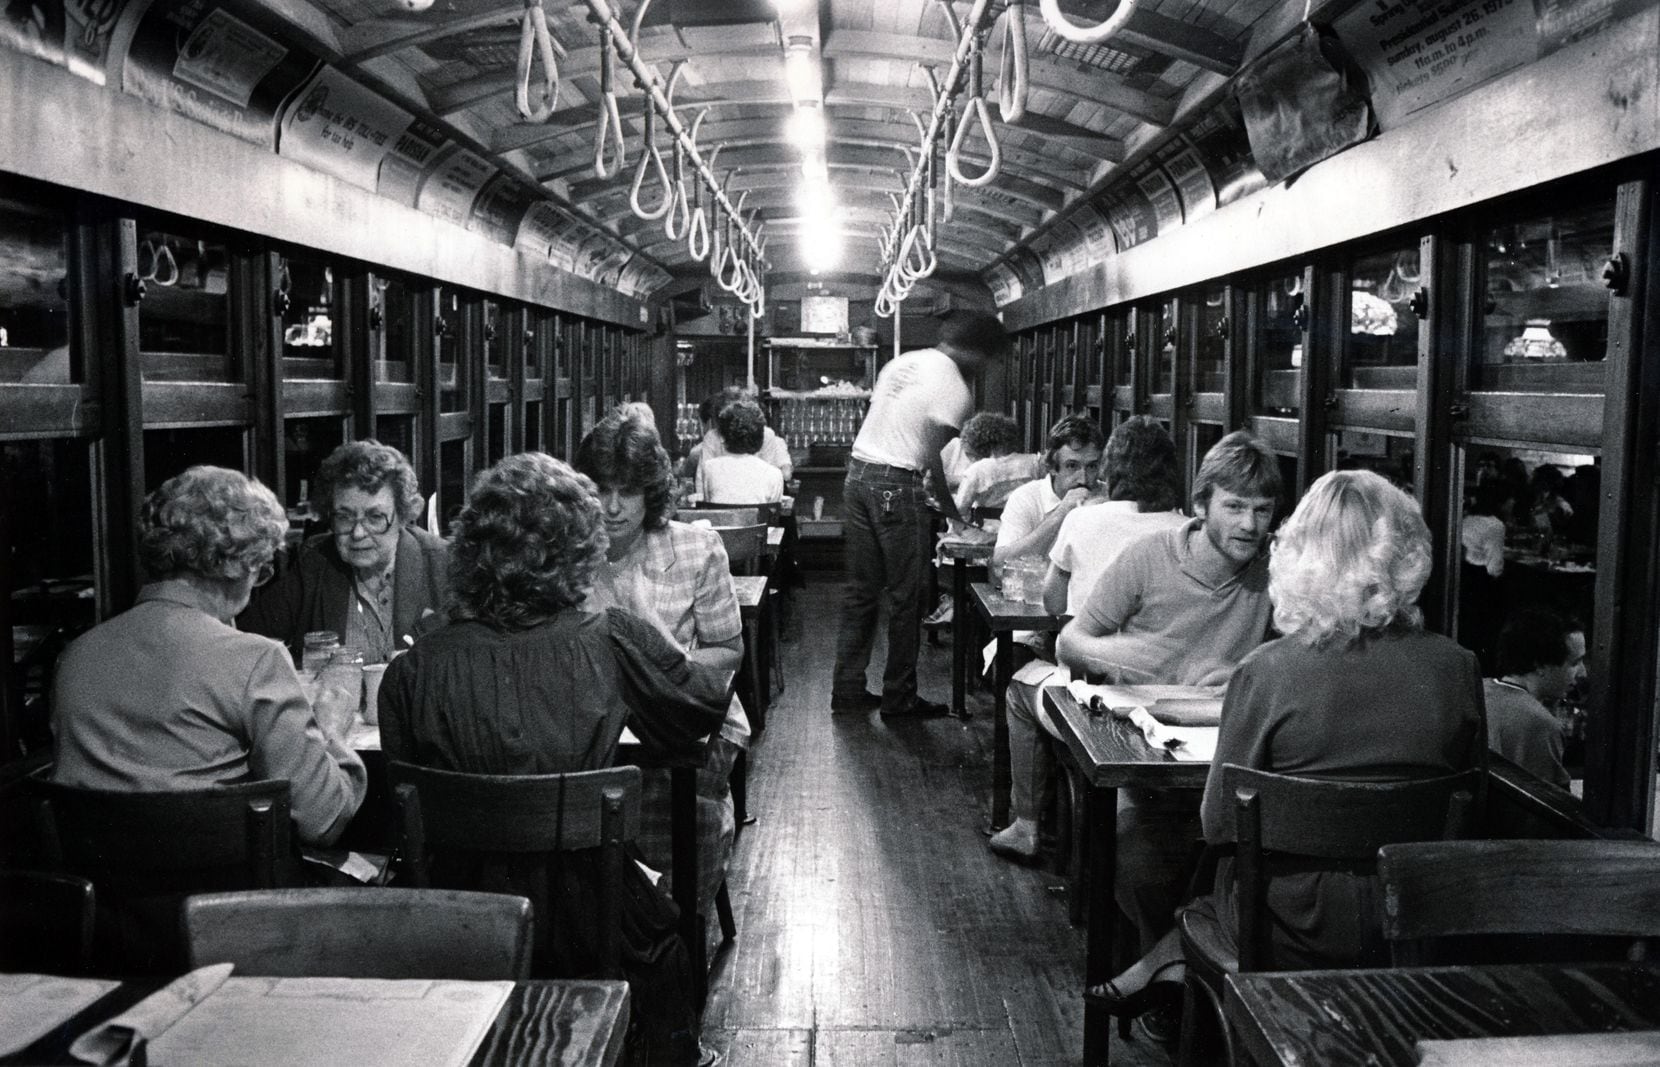 Diners eat inside the trolley at the Spaghetti Warehouse in Dallas' West End.